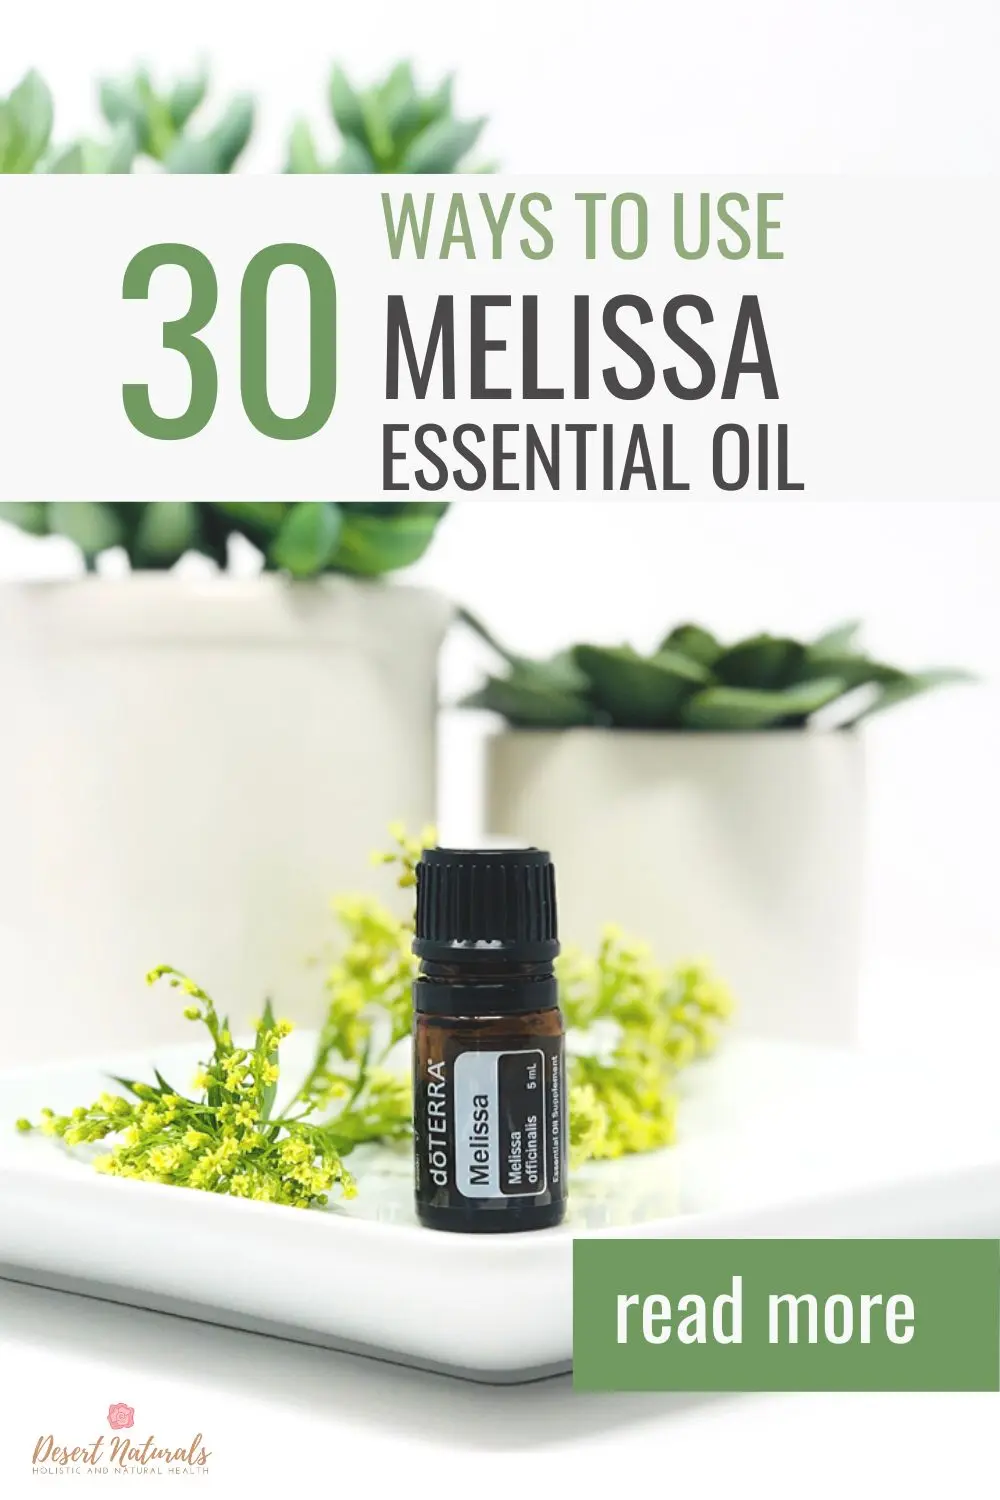 30 ways to use melissa essential oil with doterra bottle